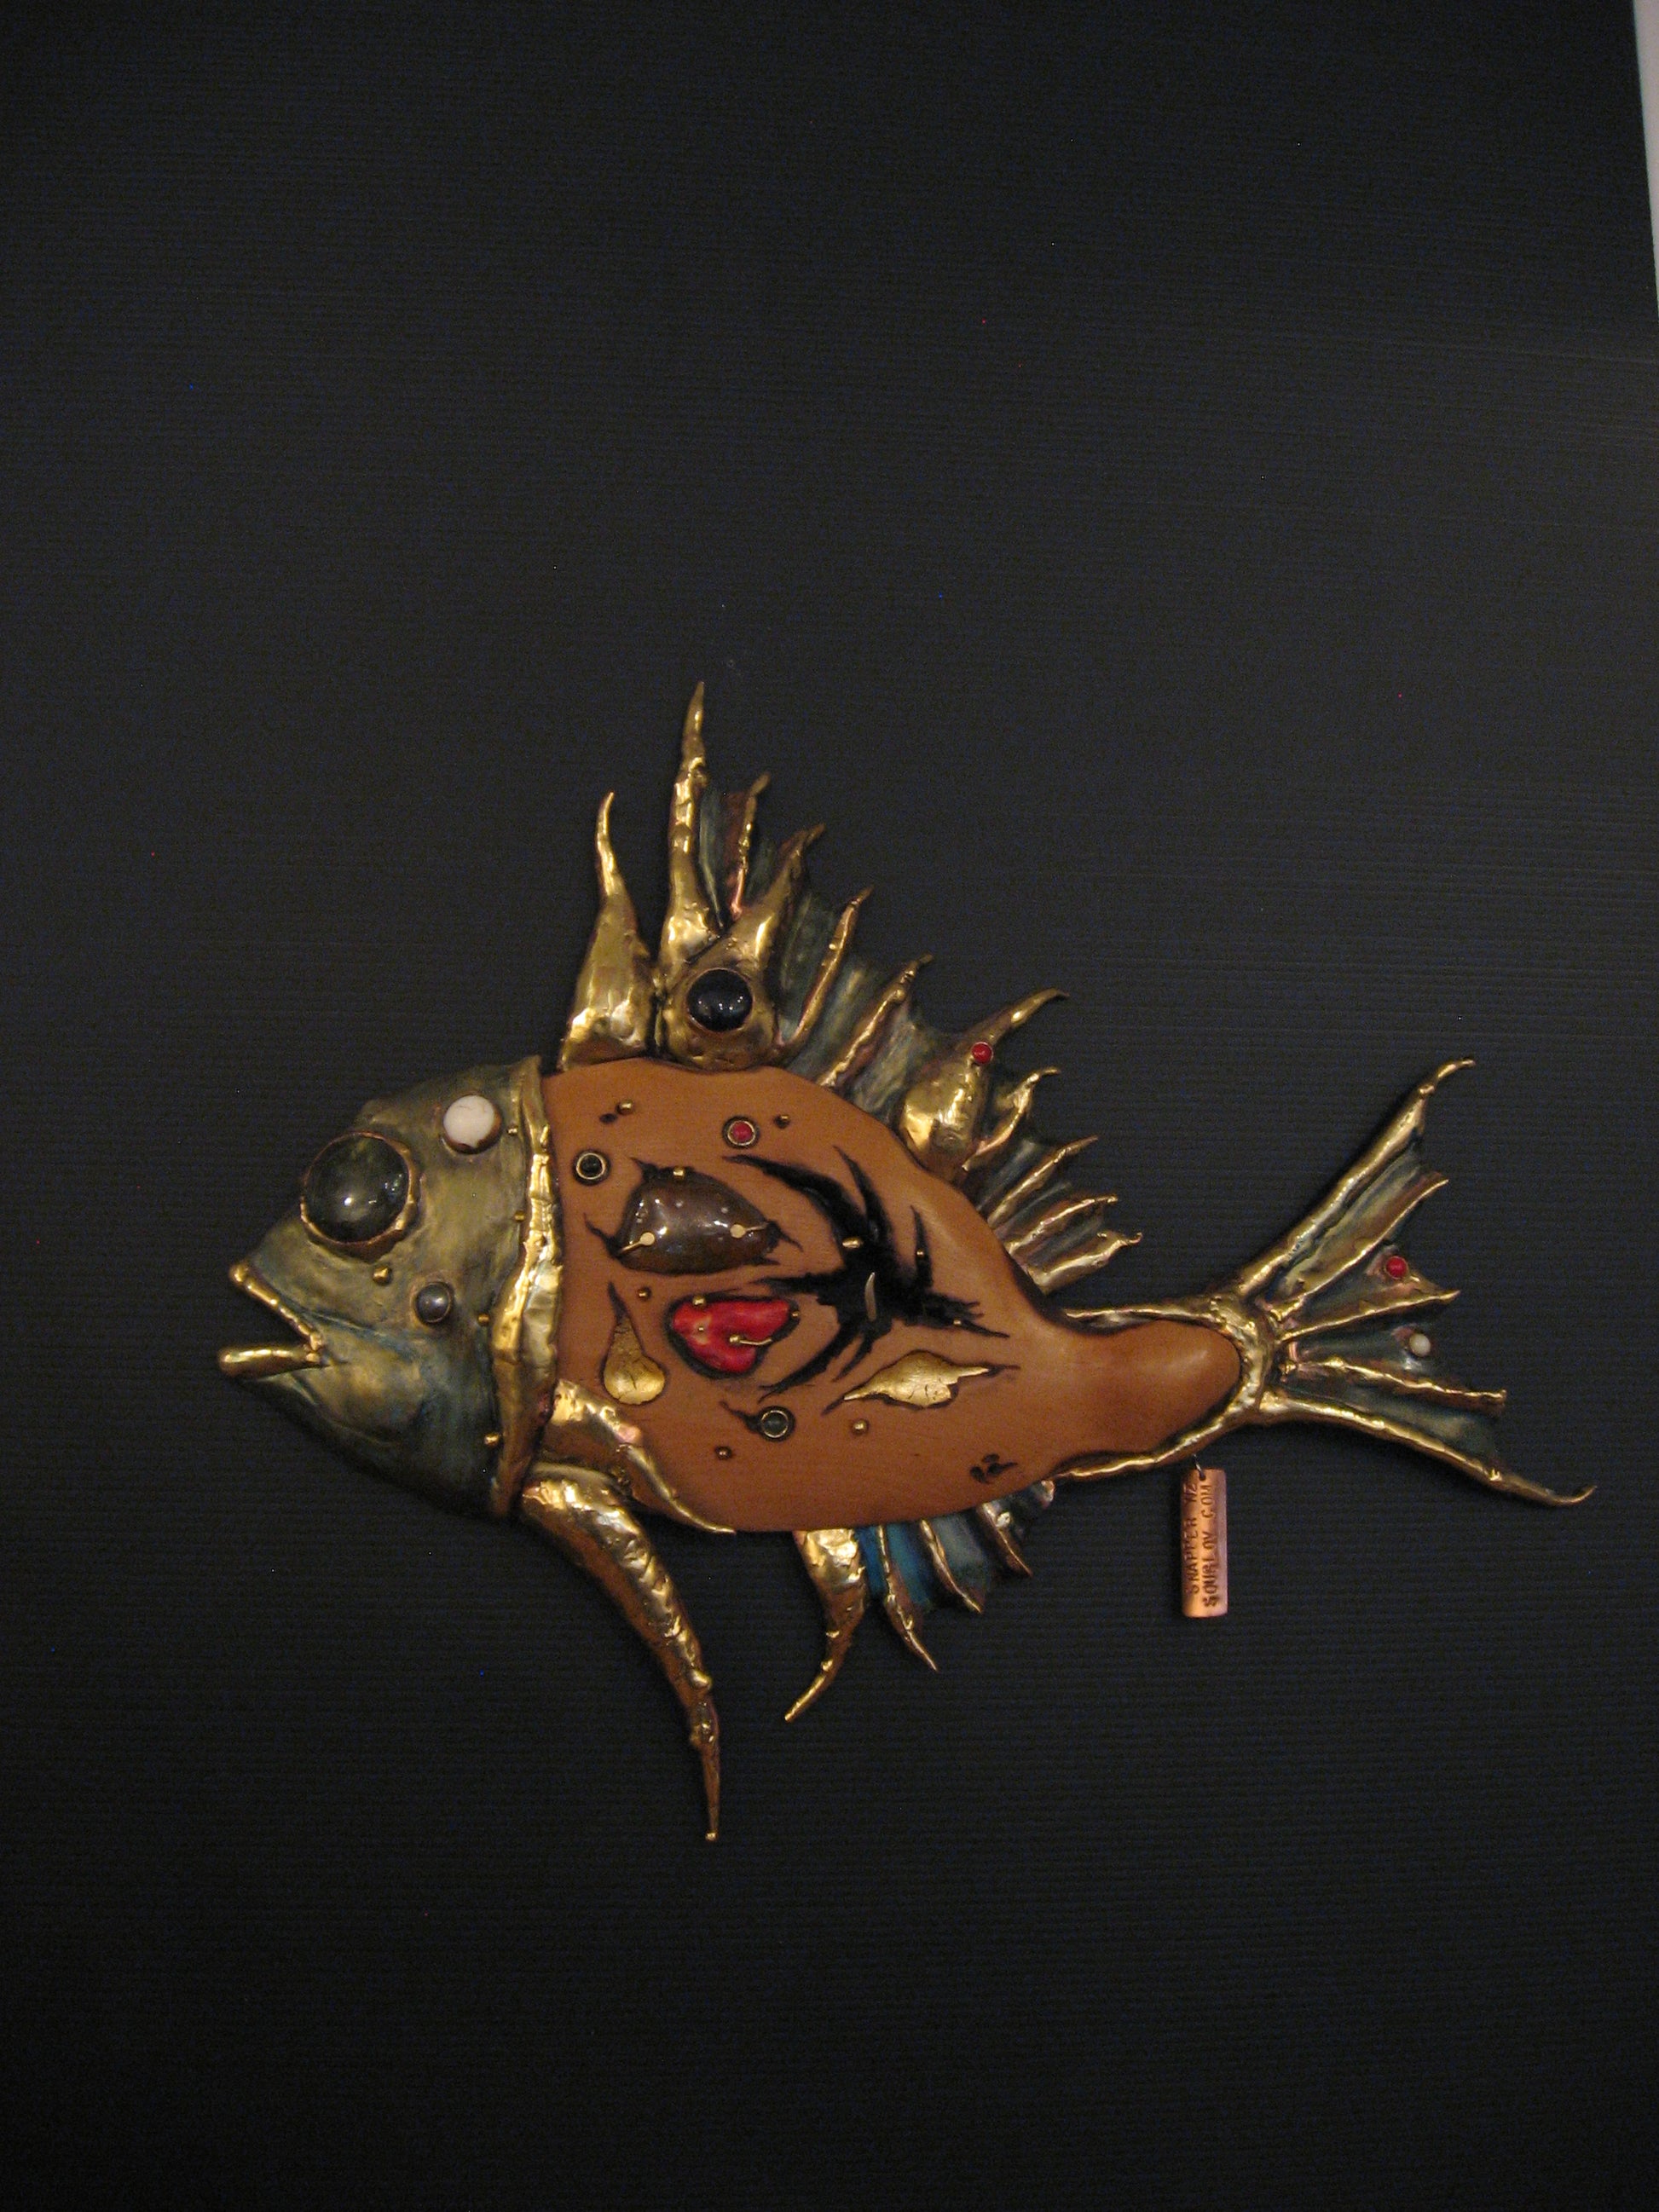 Snapper Fish Wall Art of Metal Wood and Gems by Serge Souslov Silver Fern Gallery